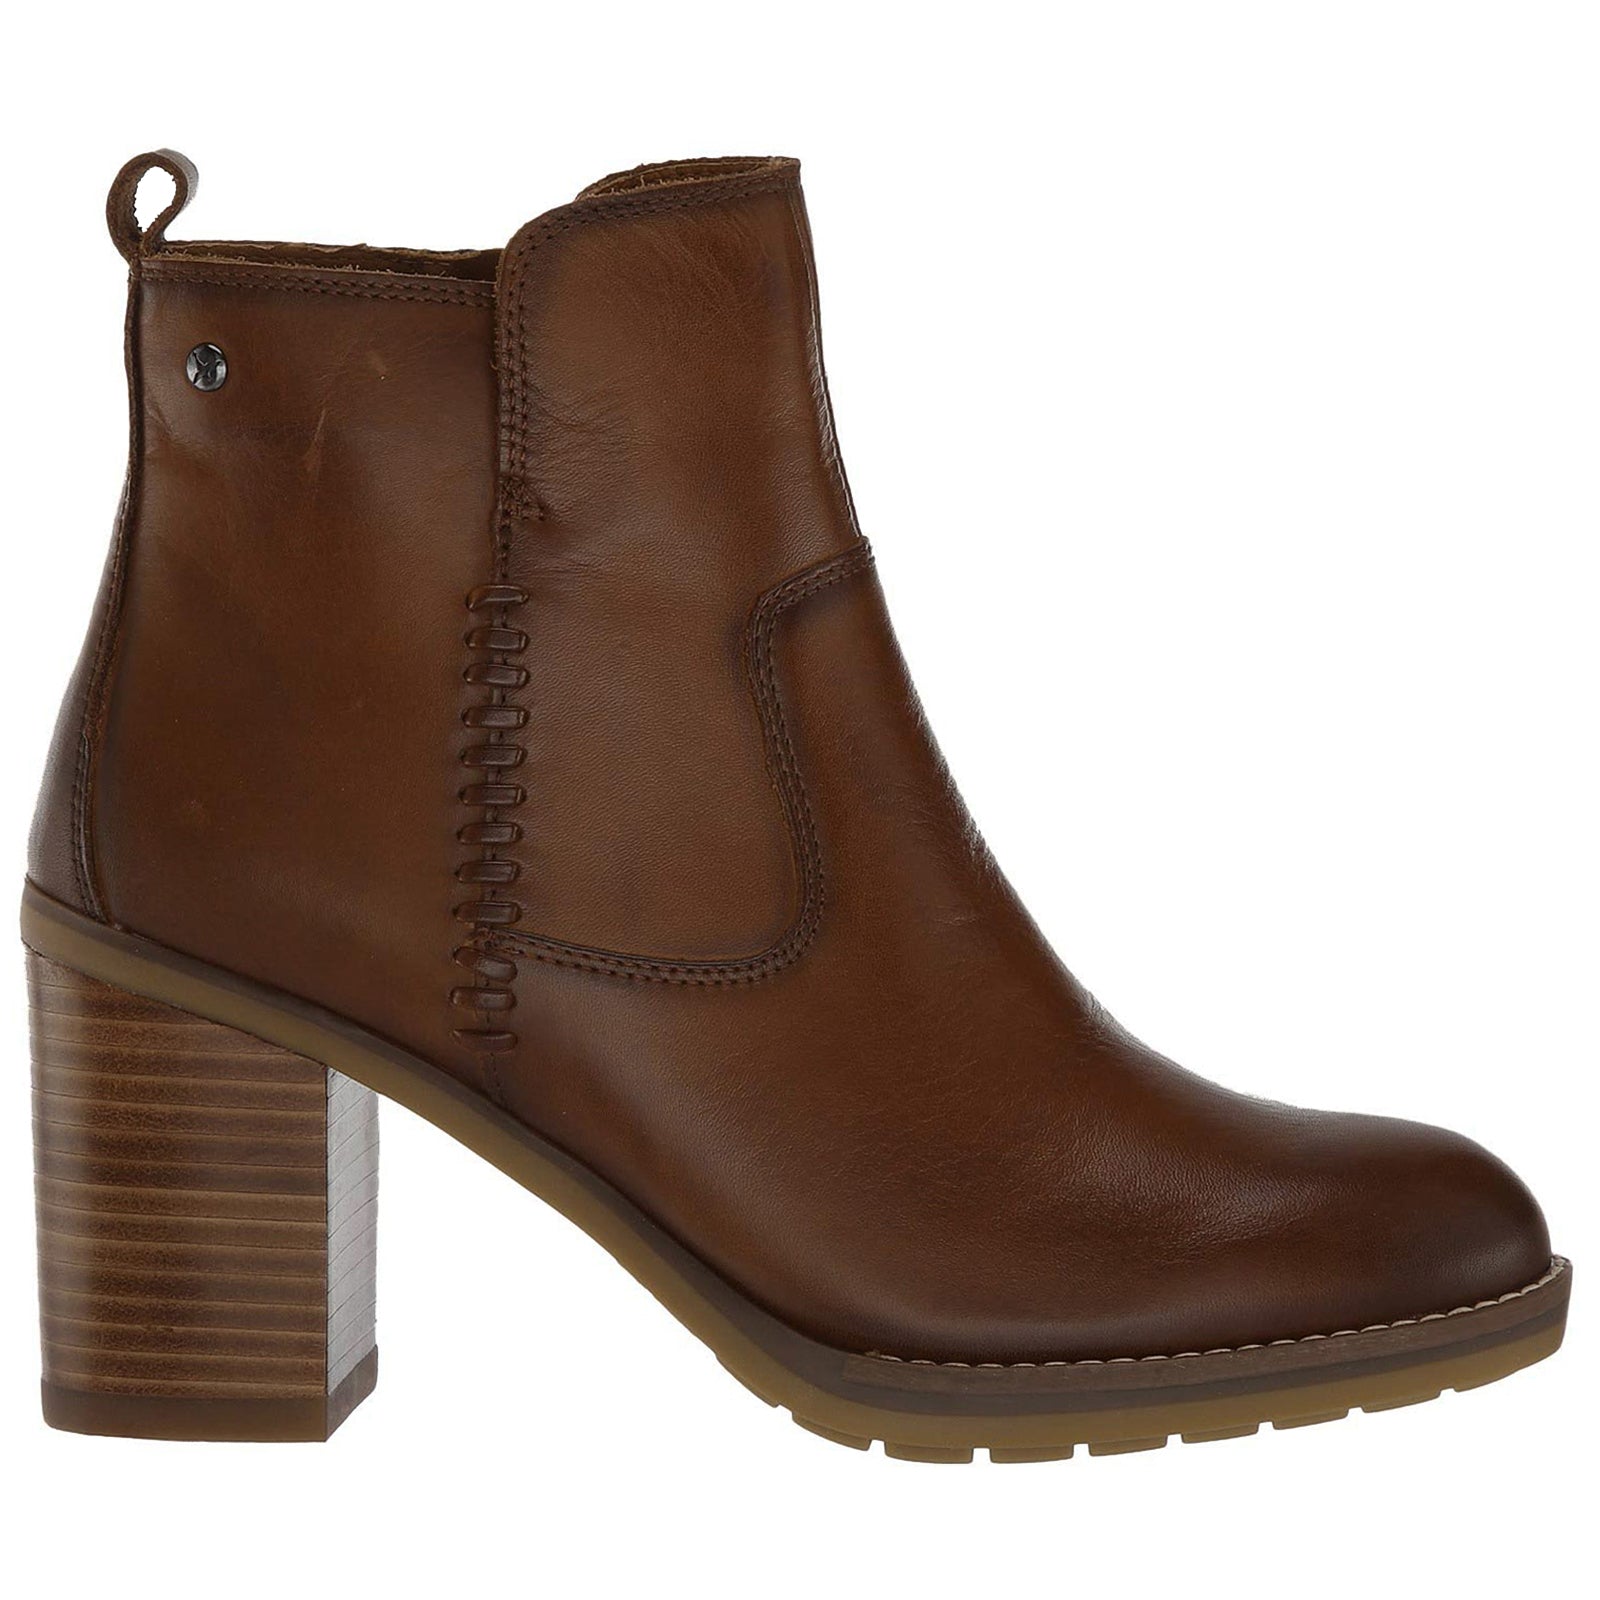 Pikolinos Womens Boots Pompeya W9T Zip-Up Leather - UK 6-6.5